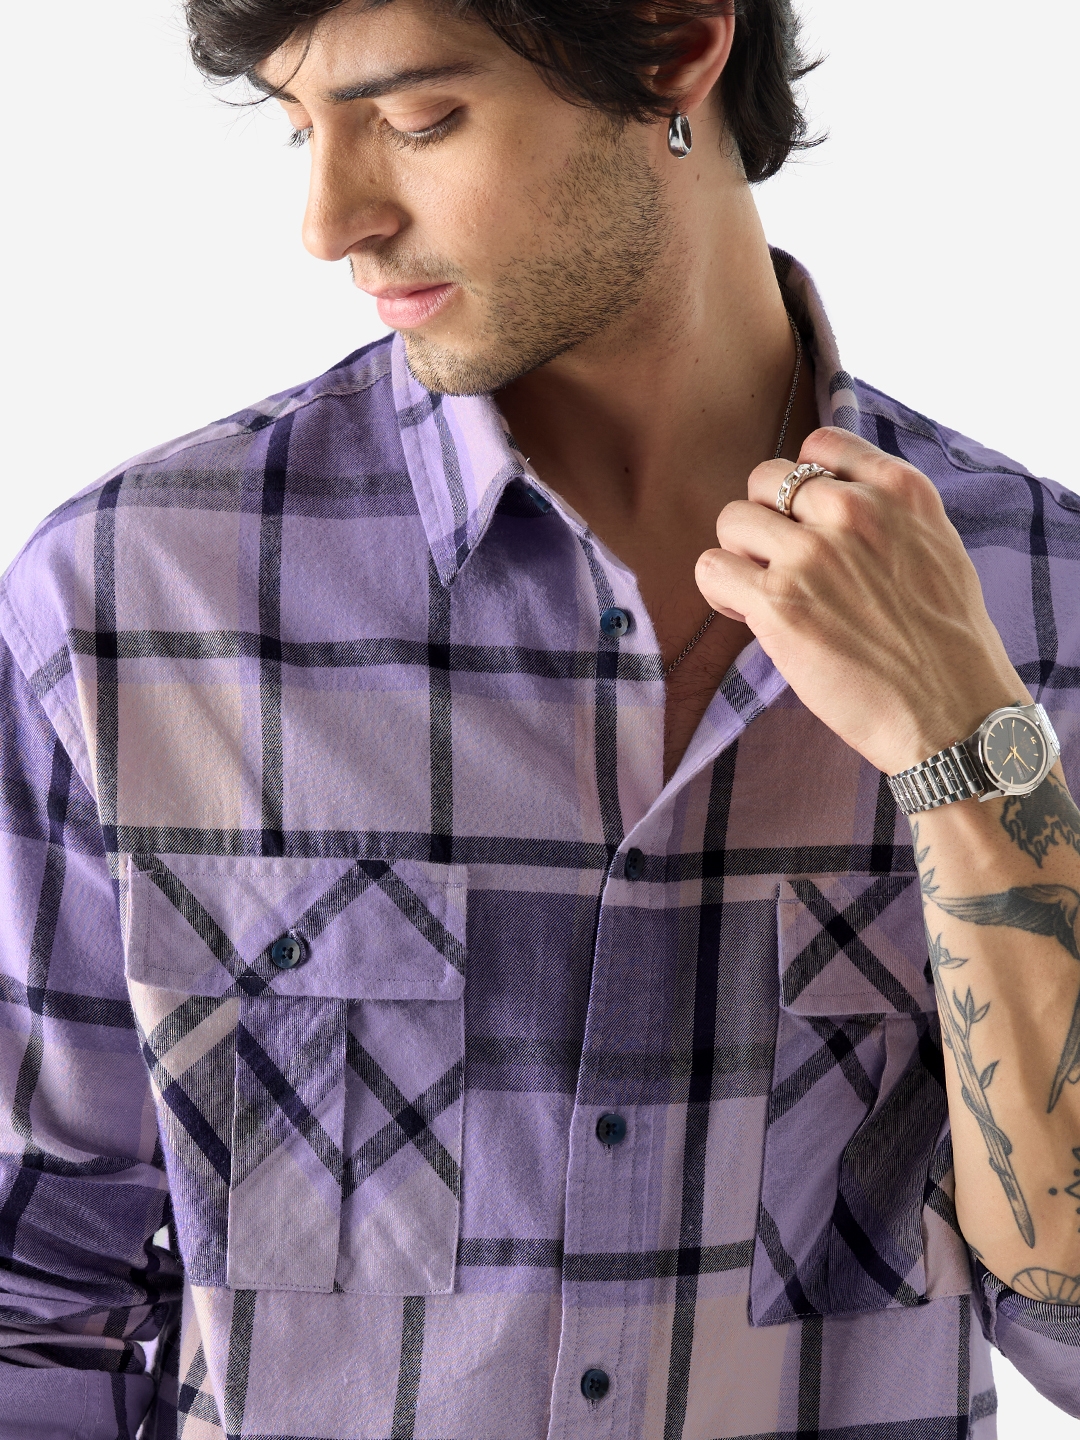 The Souled Store | Men's Plaid: Purple And Black Men's Relaxed Shirts